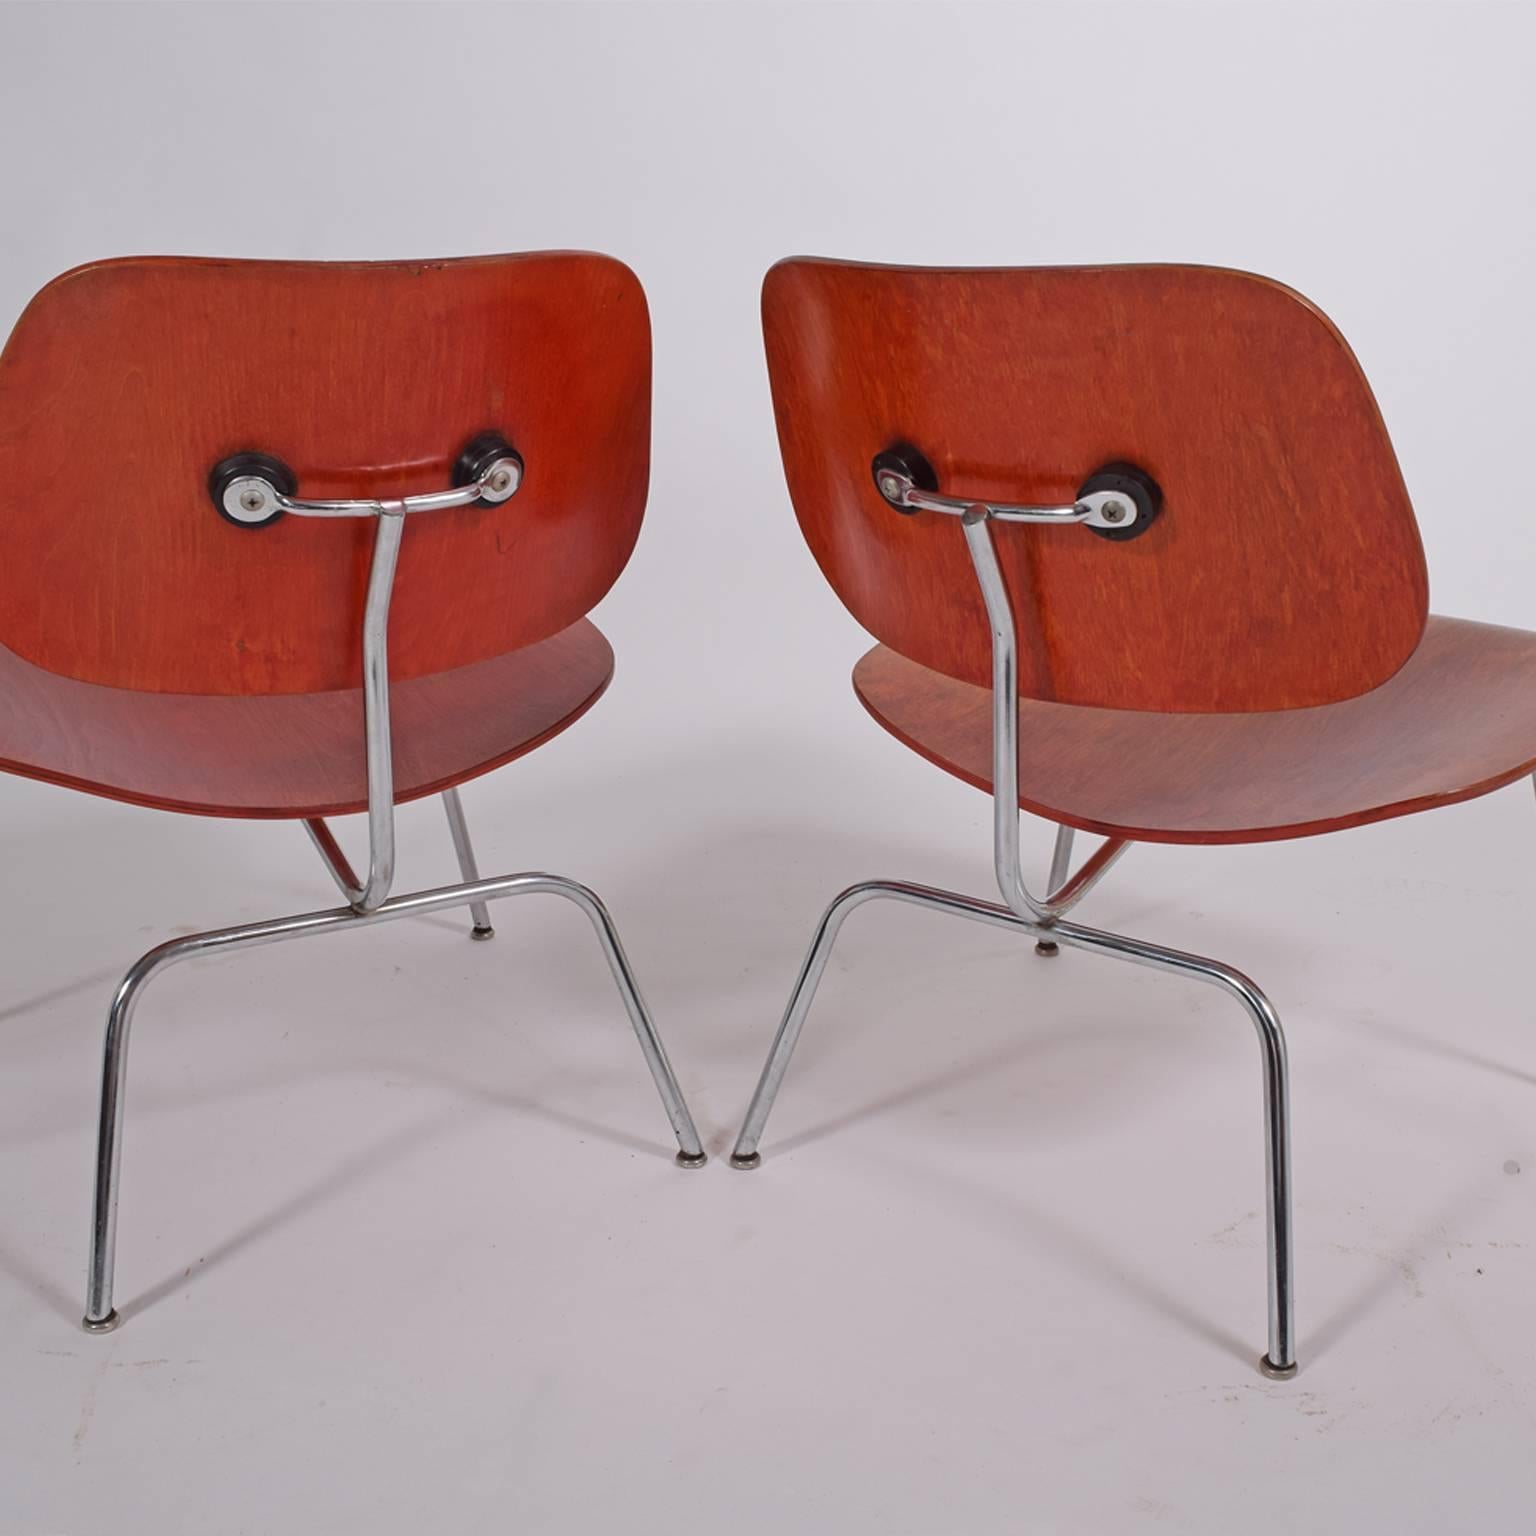 Mid-20th Century Early LCM Red Aniline Dyed by Charles Eames for Herman Miller Right One SOLD